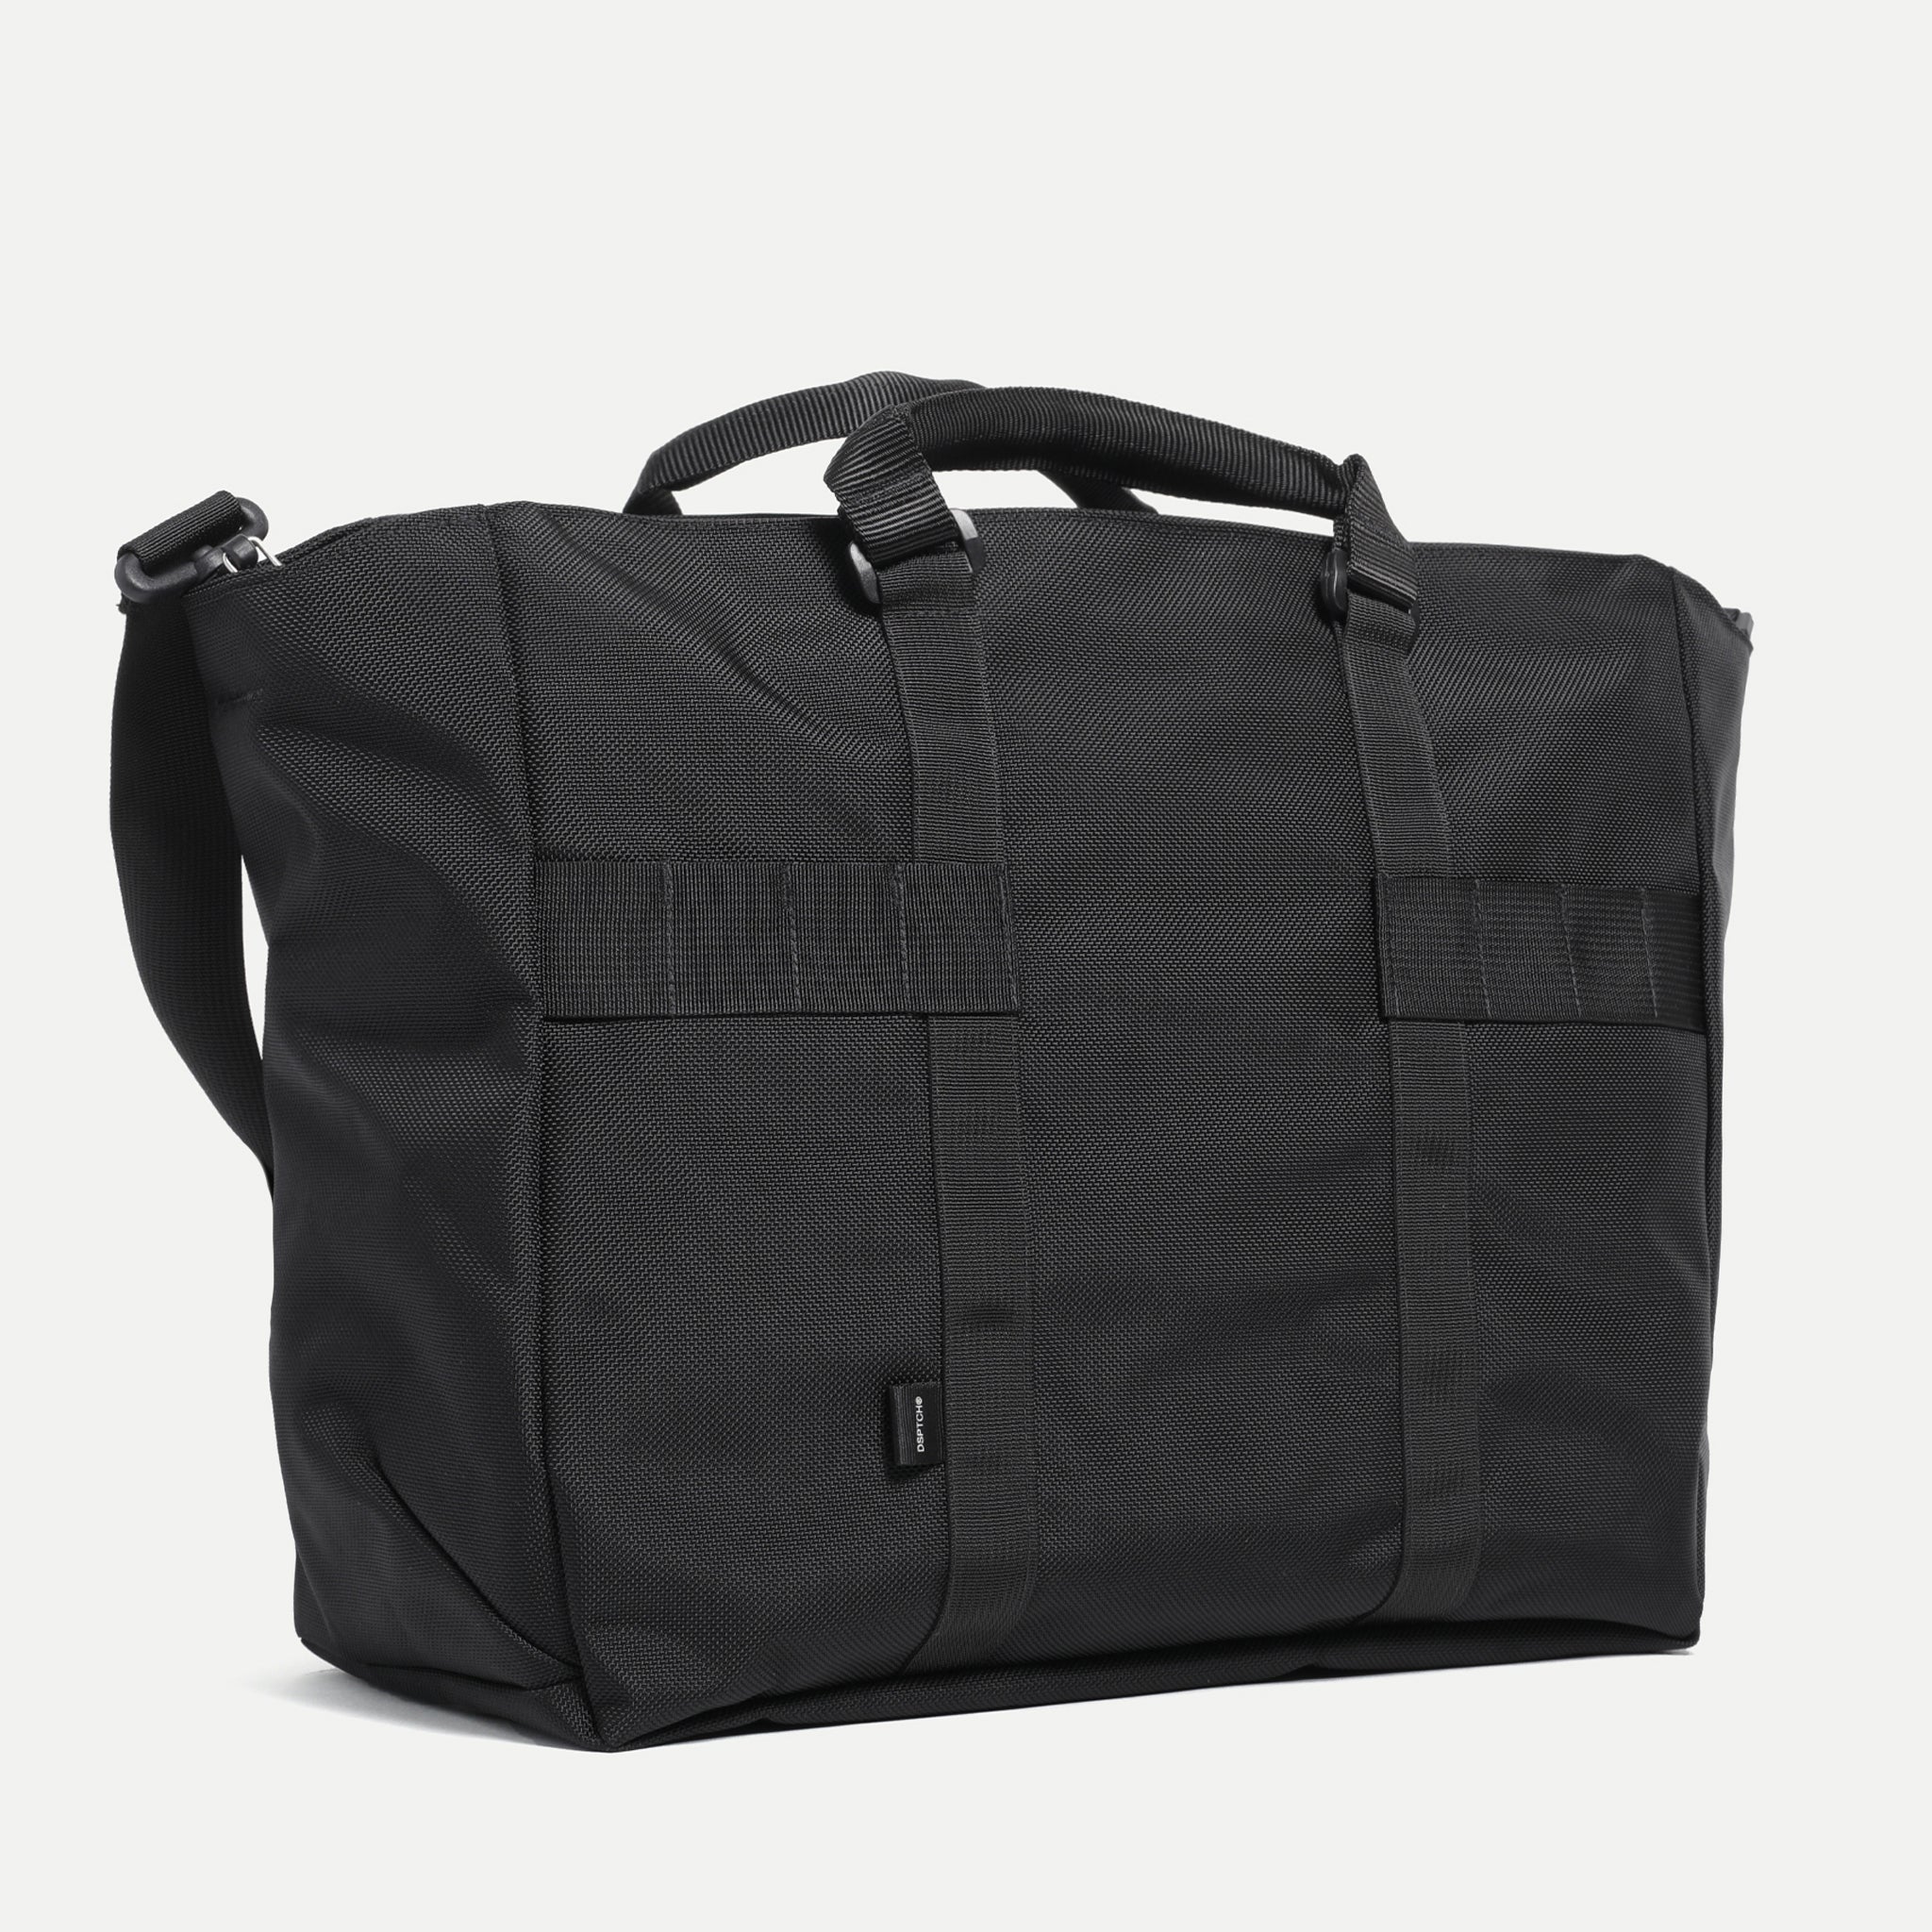 Product Spotlight: Large Utility Tote 